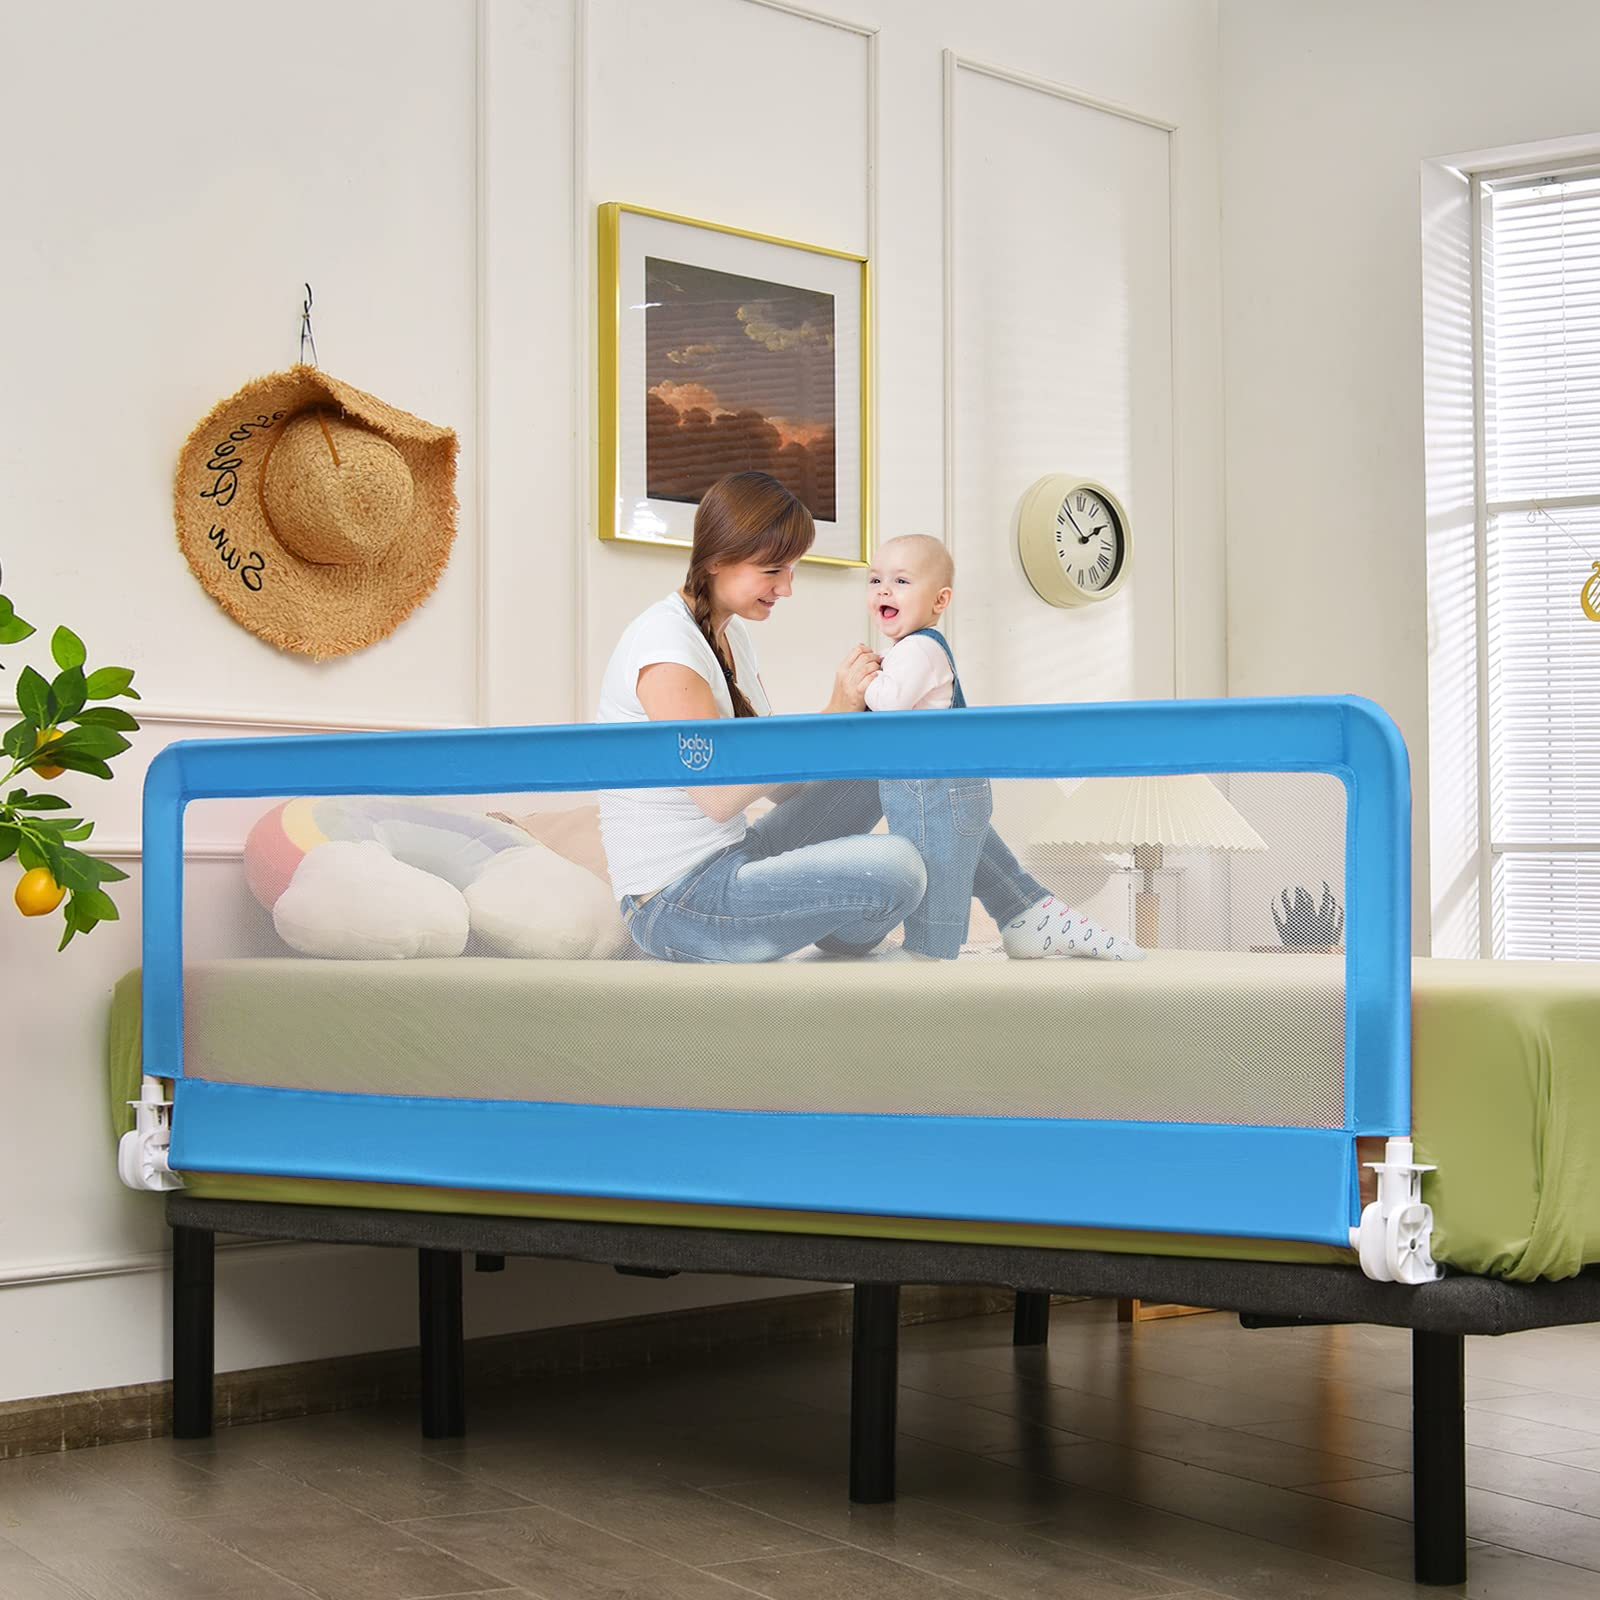 Costzon Bed Rails for Toddlers, 71'' Extra Long, Swing Down Bed